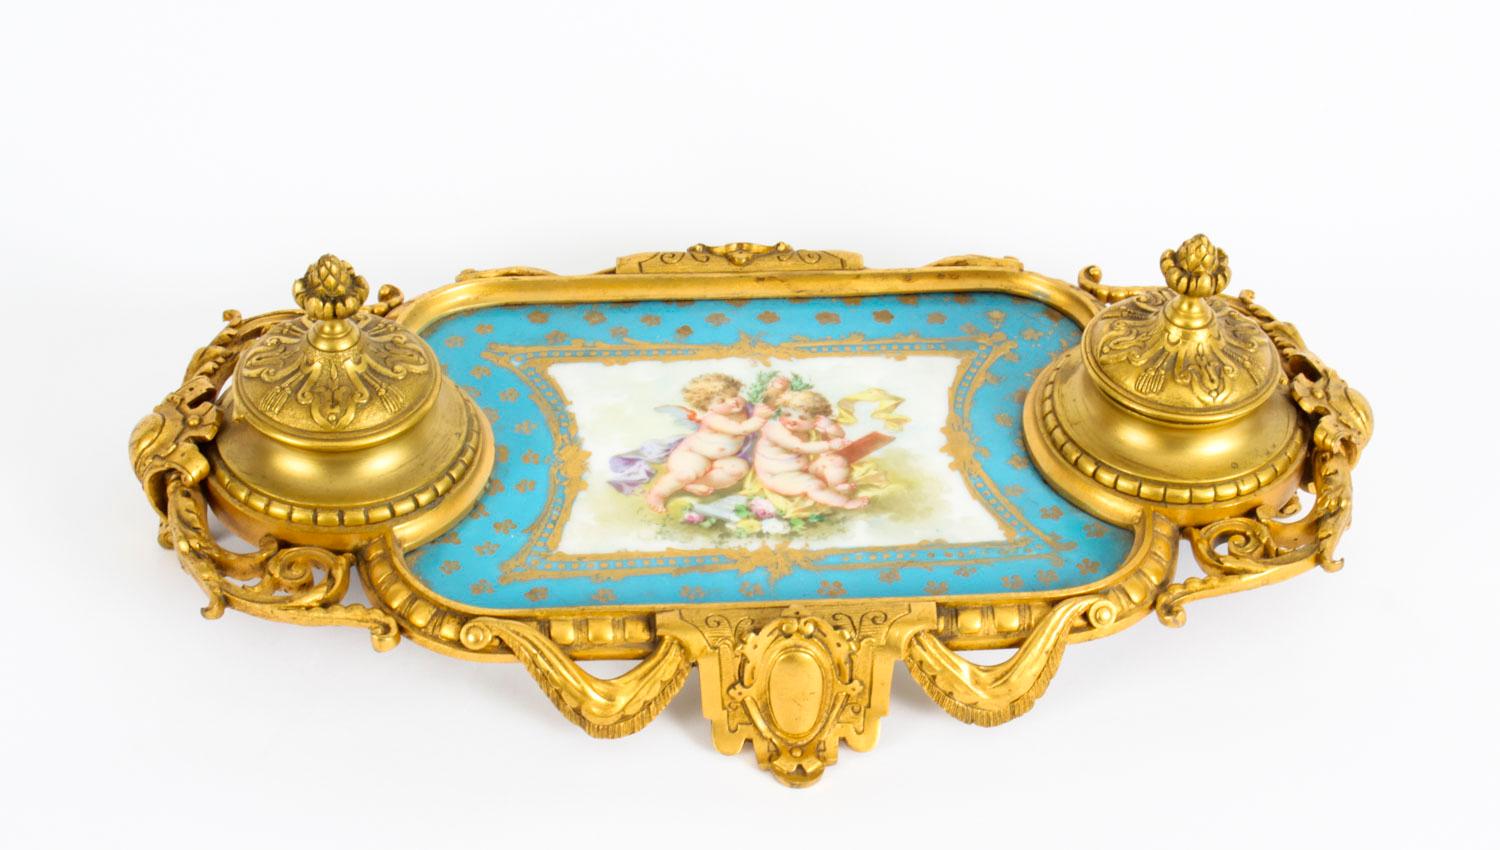 Antique French Ormolu and Sèvres Porcelain Standish Inkstand, 19th Century 5